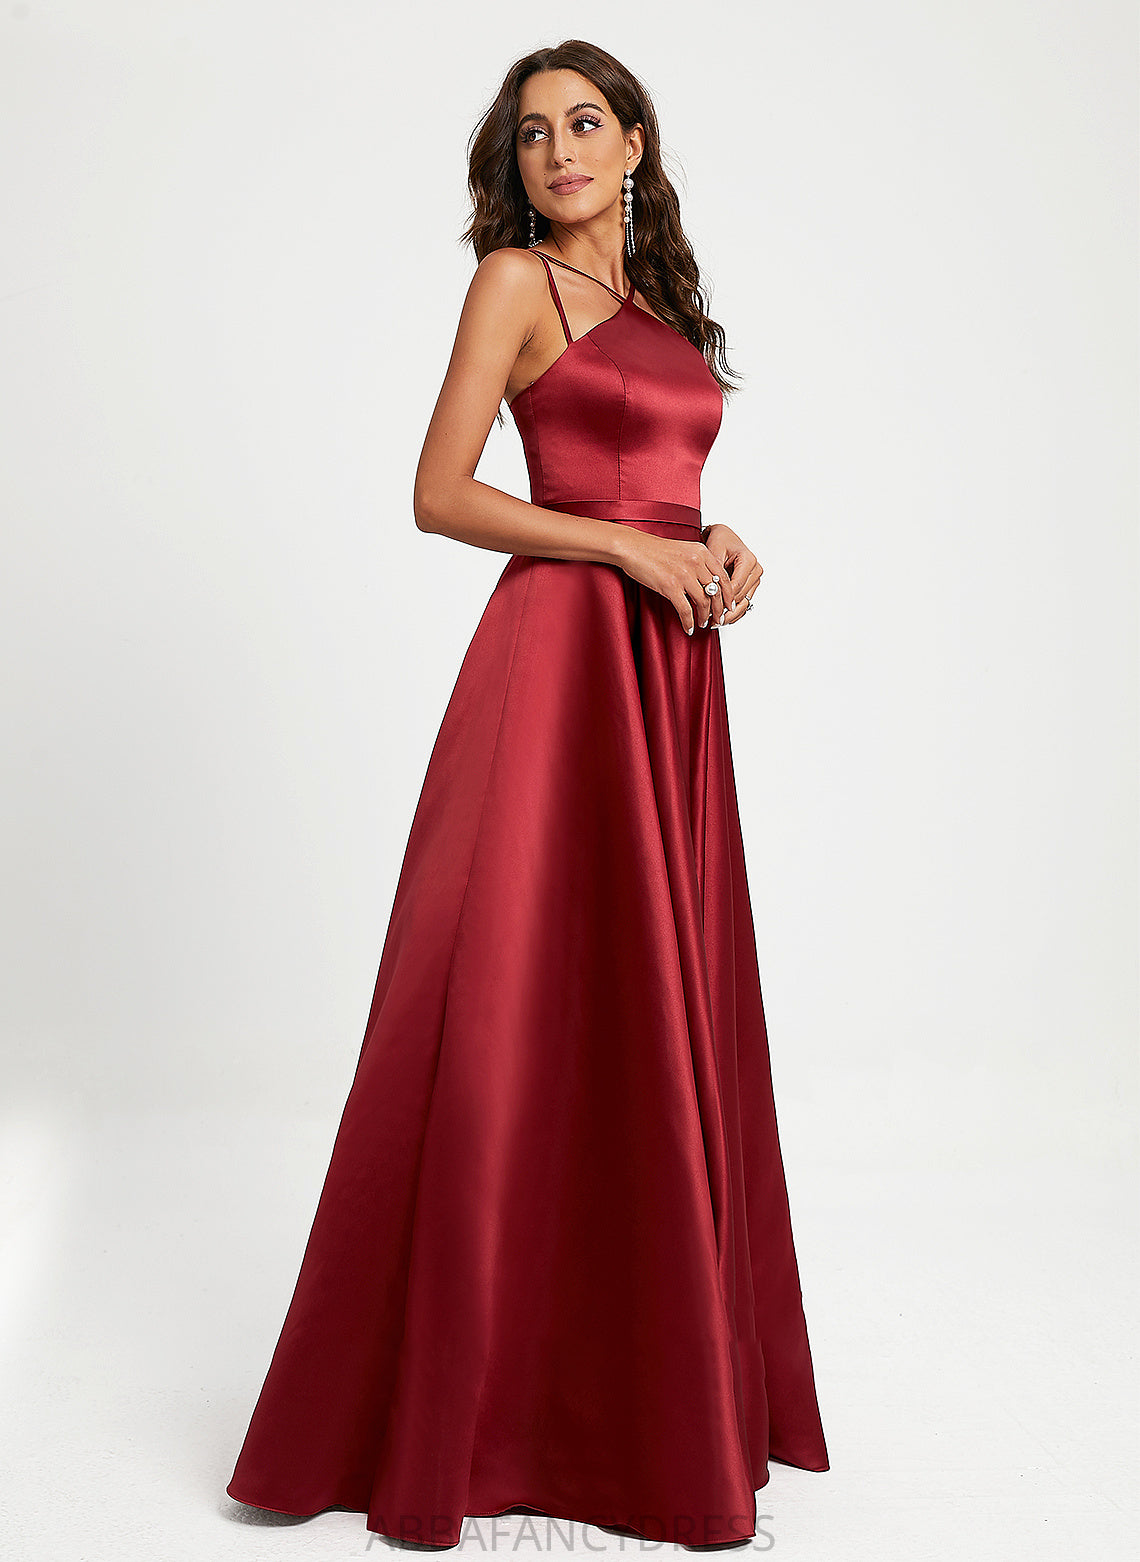 Floor-Length Satin A-Line Prom Dresses Arely Halter